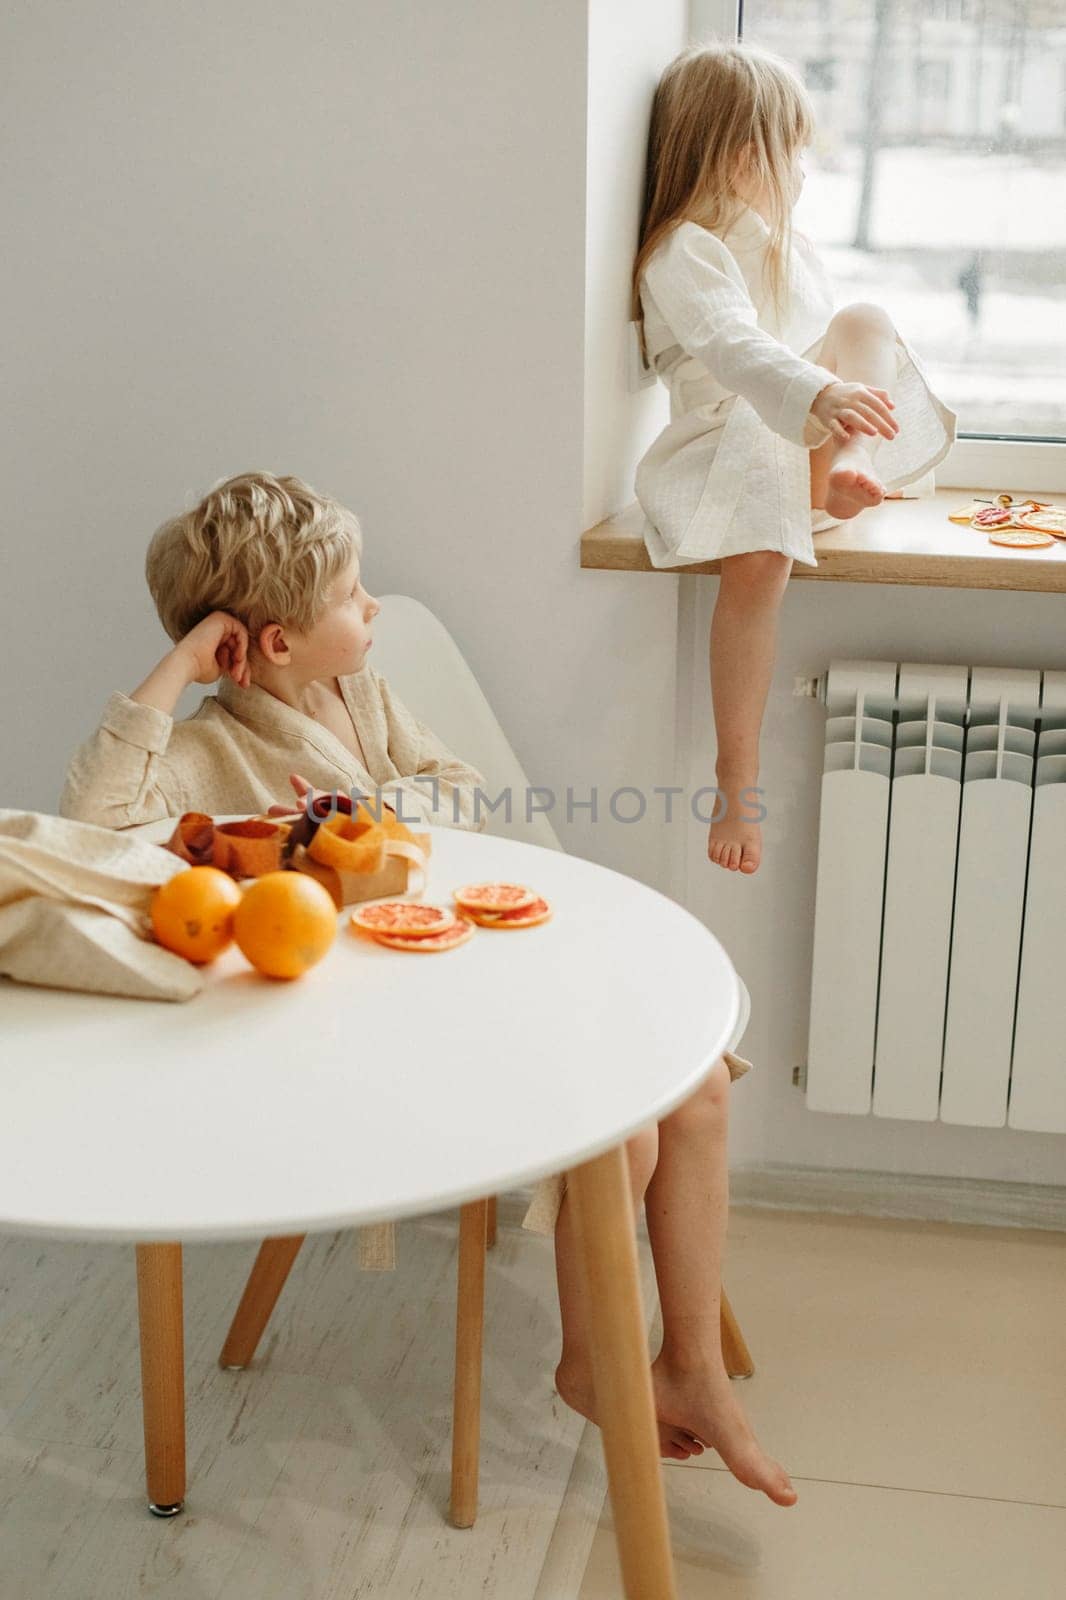 A boy and a girl in bathrobes are eating candied fruit and marmalade in the kitchen. The boy looks at the girl, the girl sits on the windowsill.